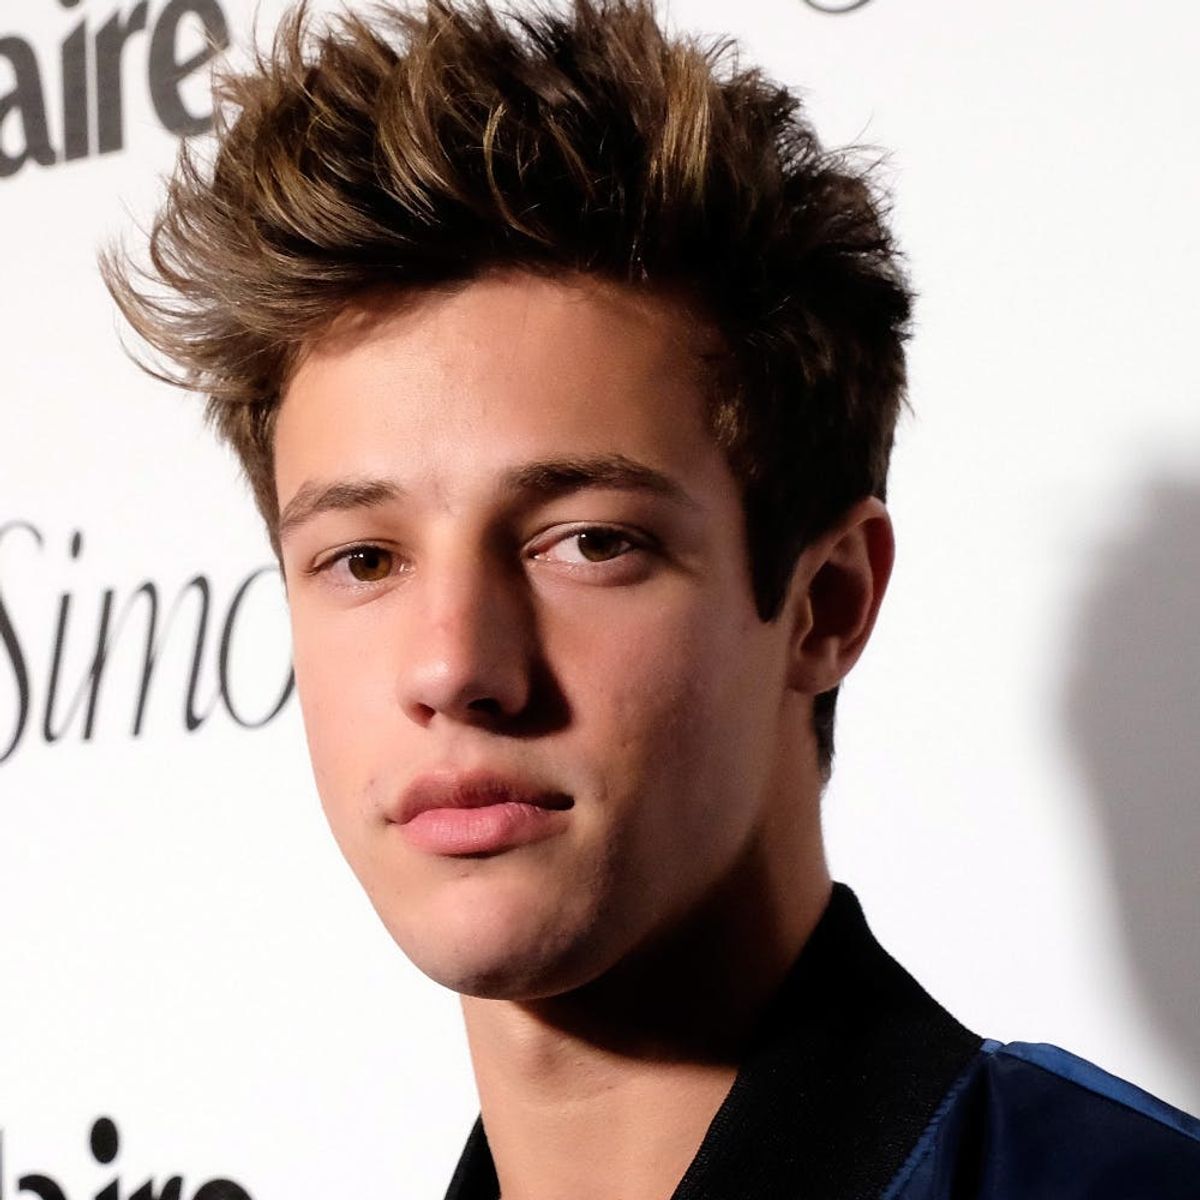 Netflix Announces Show With Cameron Dallas in Its 1st “Digital Celebrity” Series